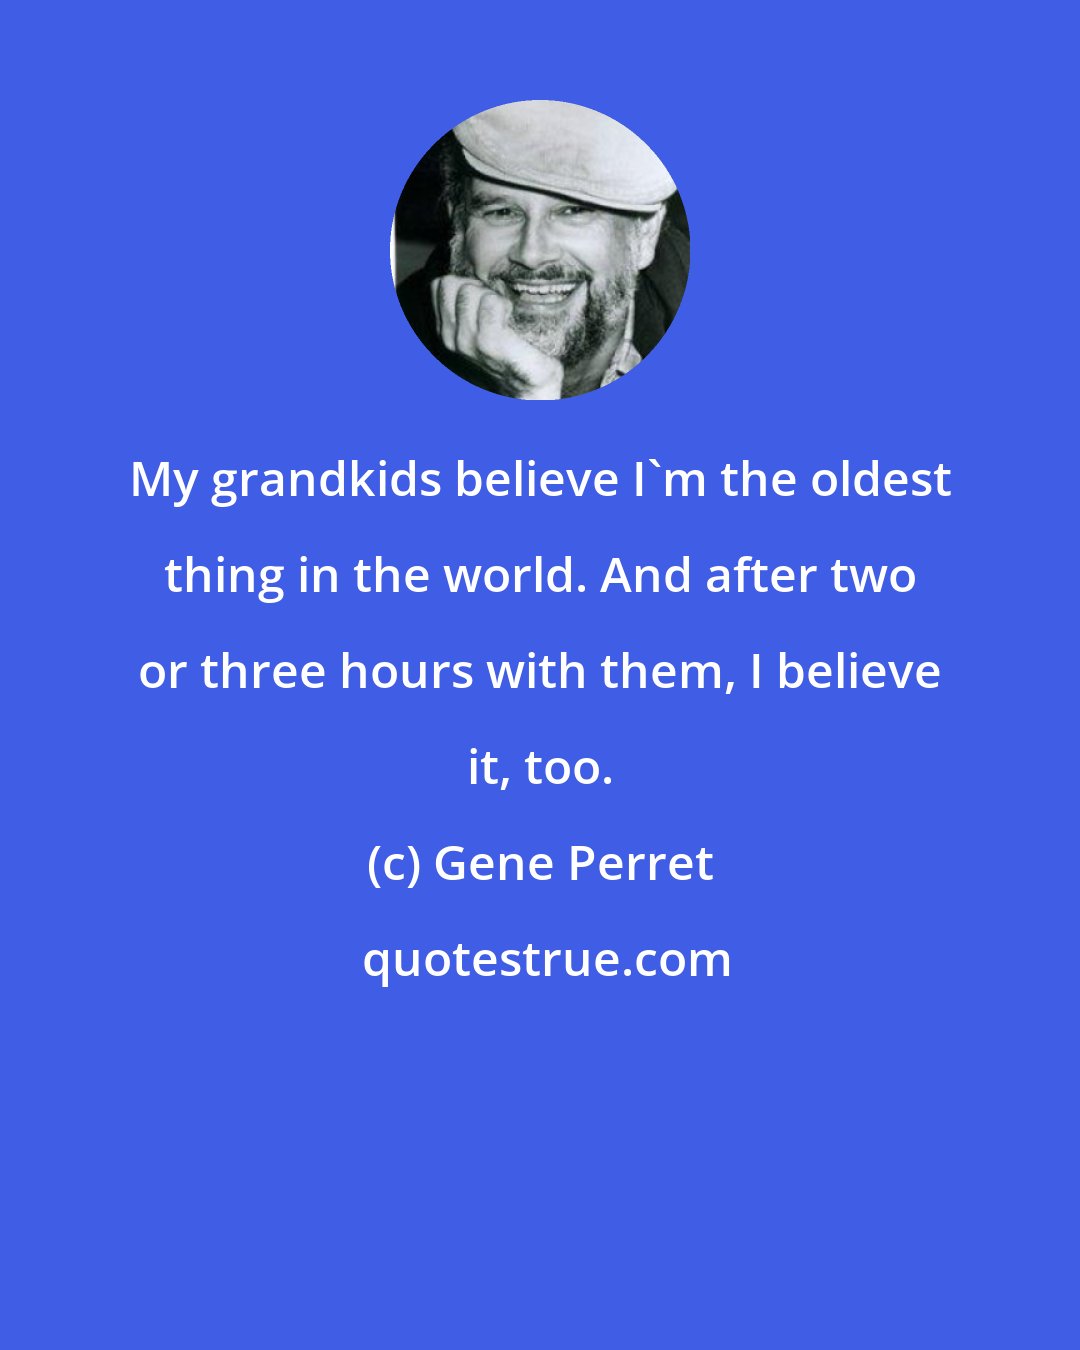 Gene Perret: My grandkids believe I'm the oldest thing in the world. And after two or three hours with them, I believe it, too.